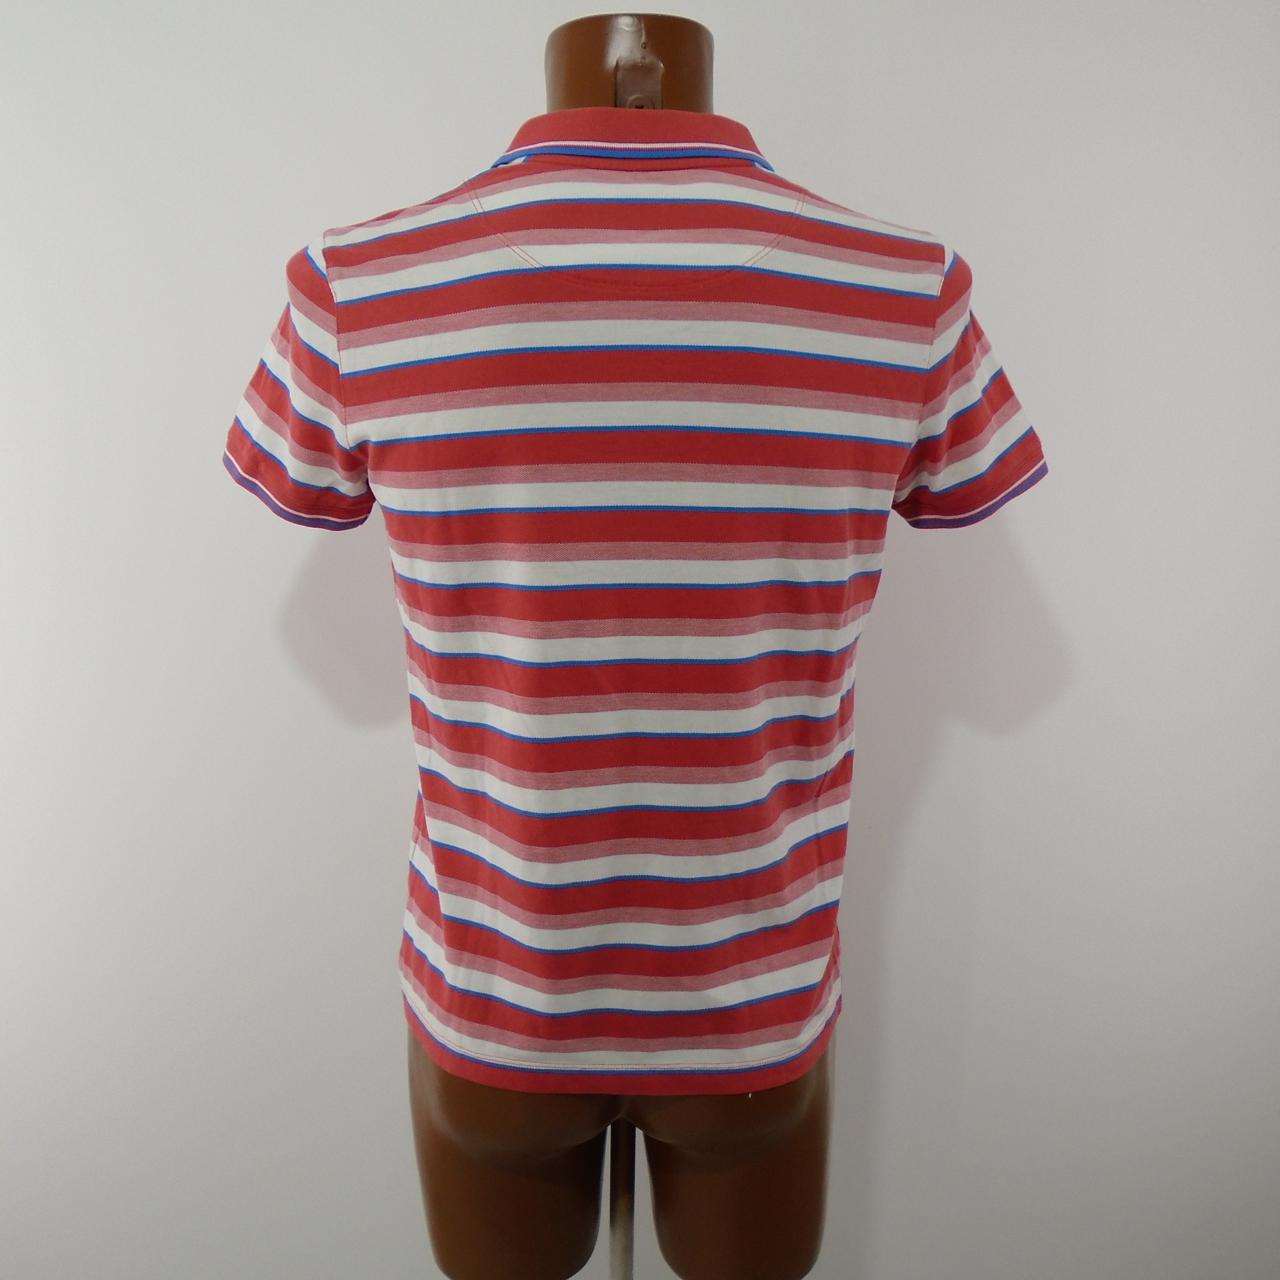 Men's Polo Hugo Boss. Multicolor. S. New without tags